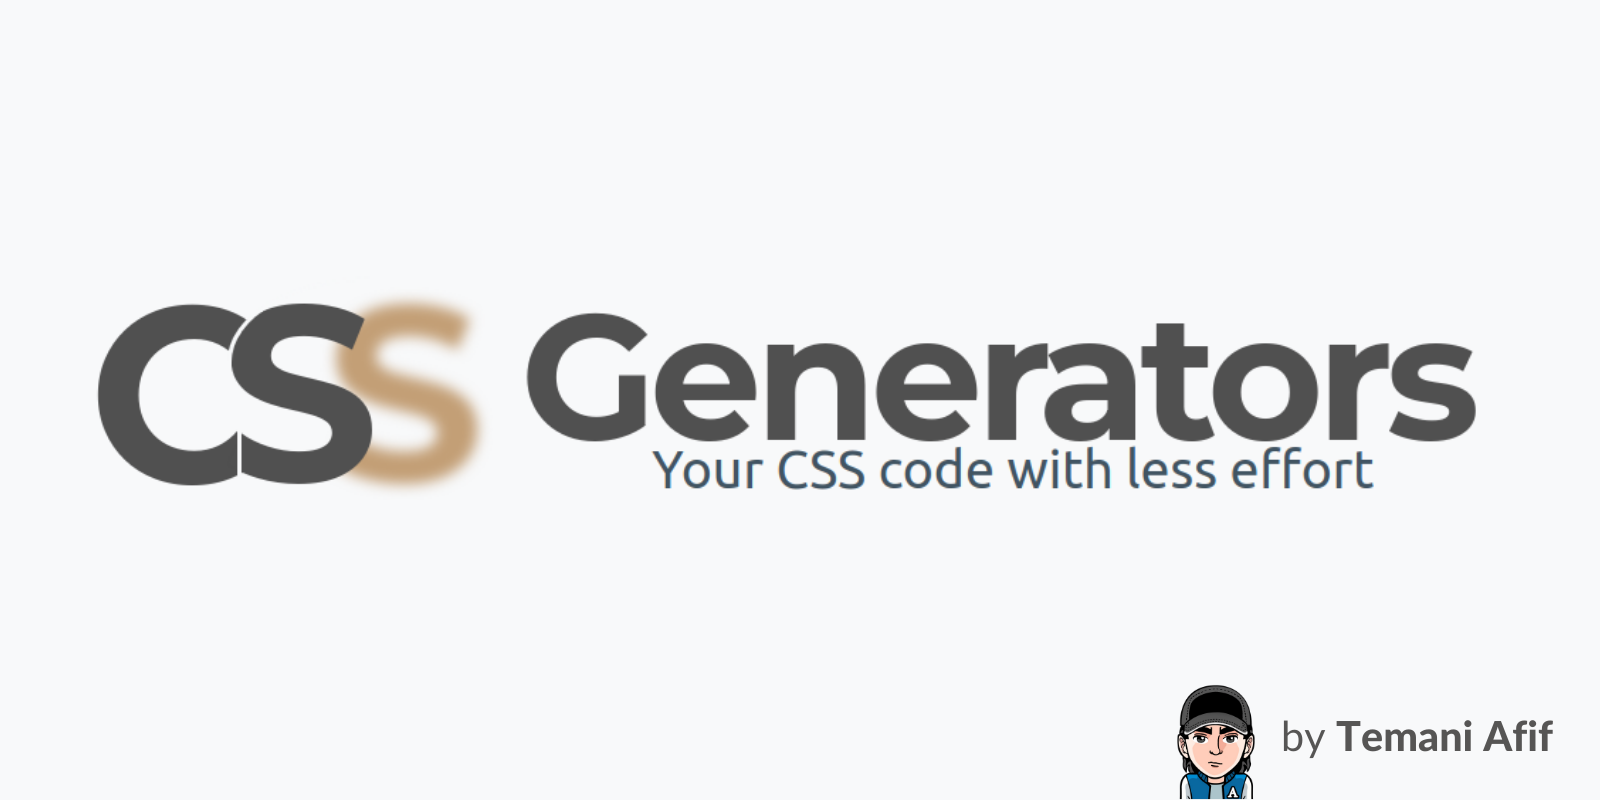 CSS Generators: Your CSS code with less effort